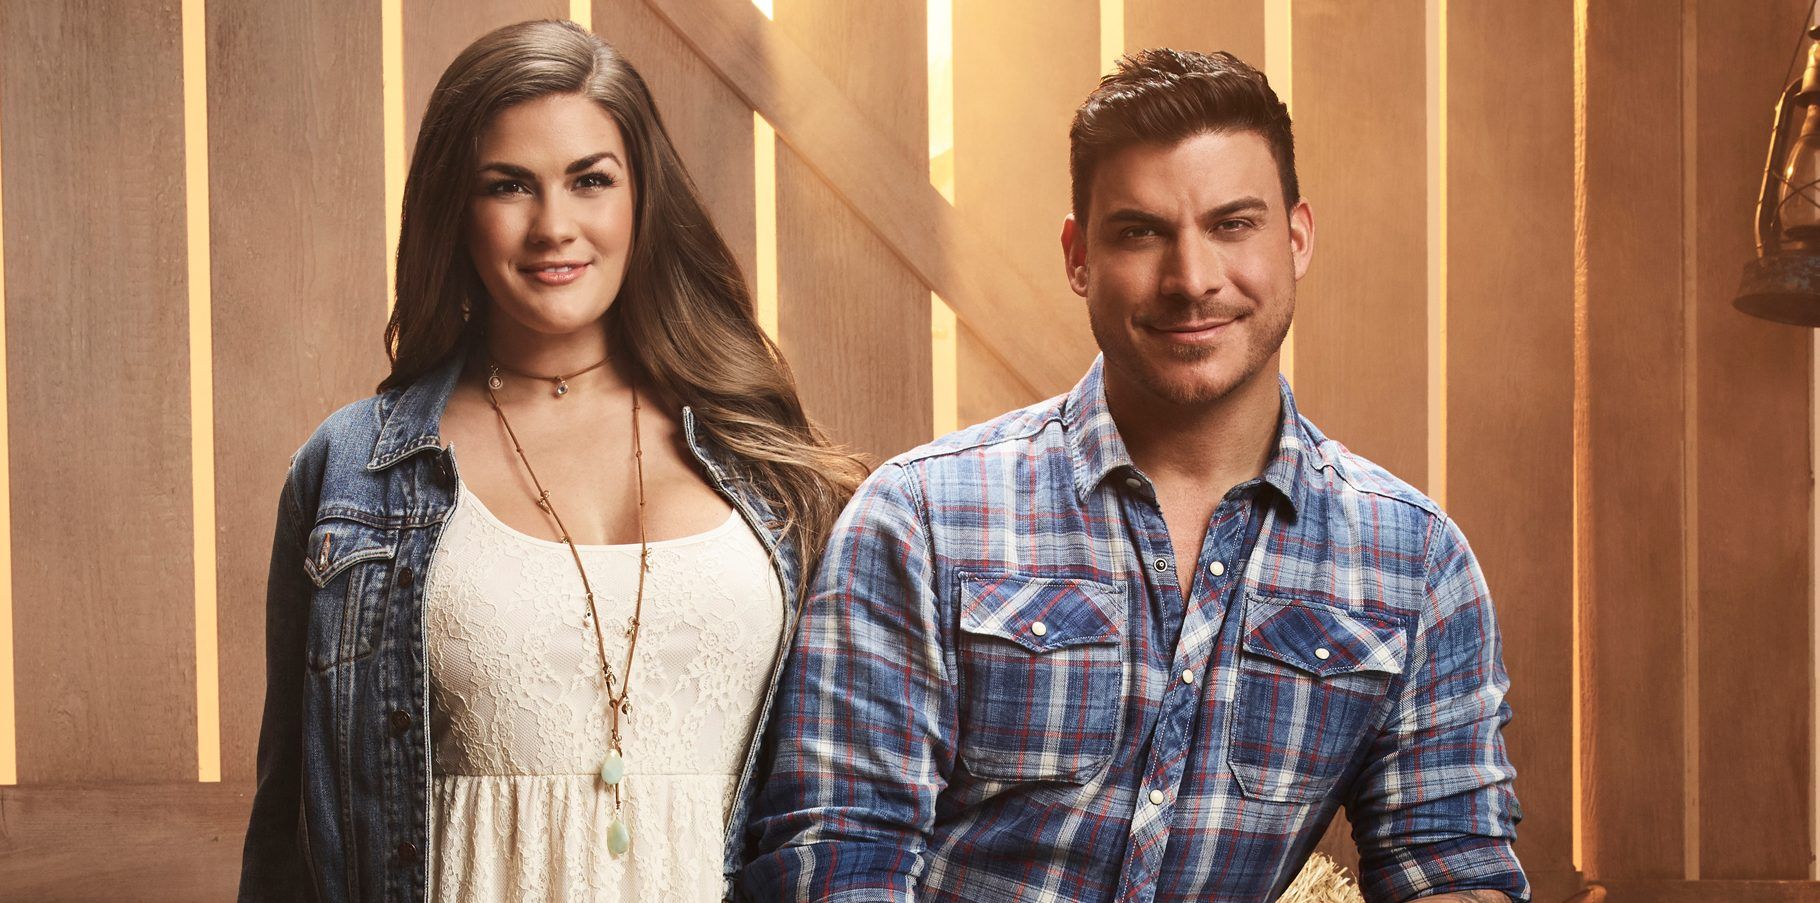 Jax Taylor and Brittany Cartwright in Vanderpump Rules